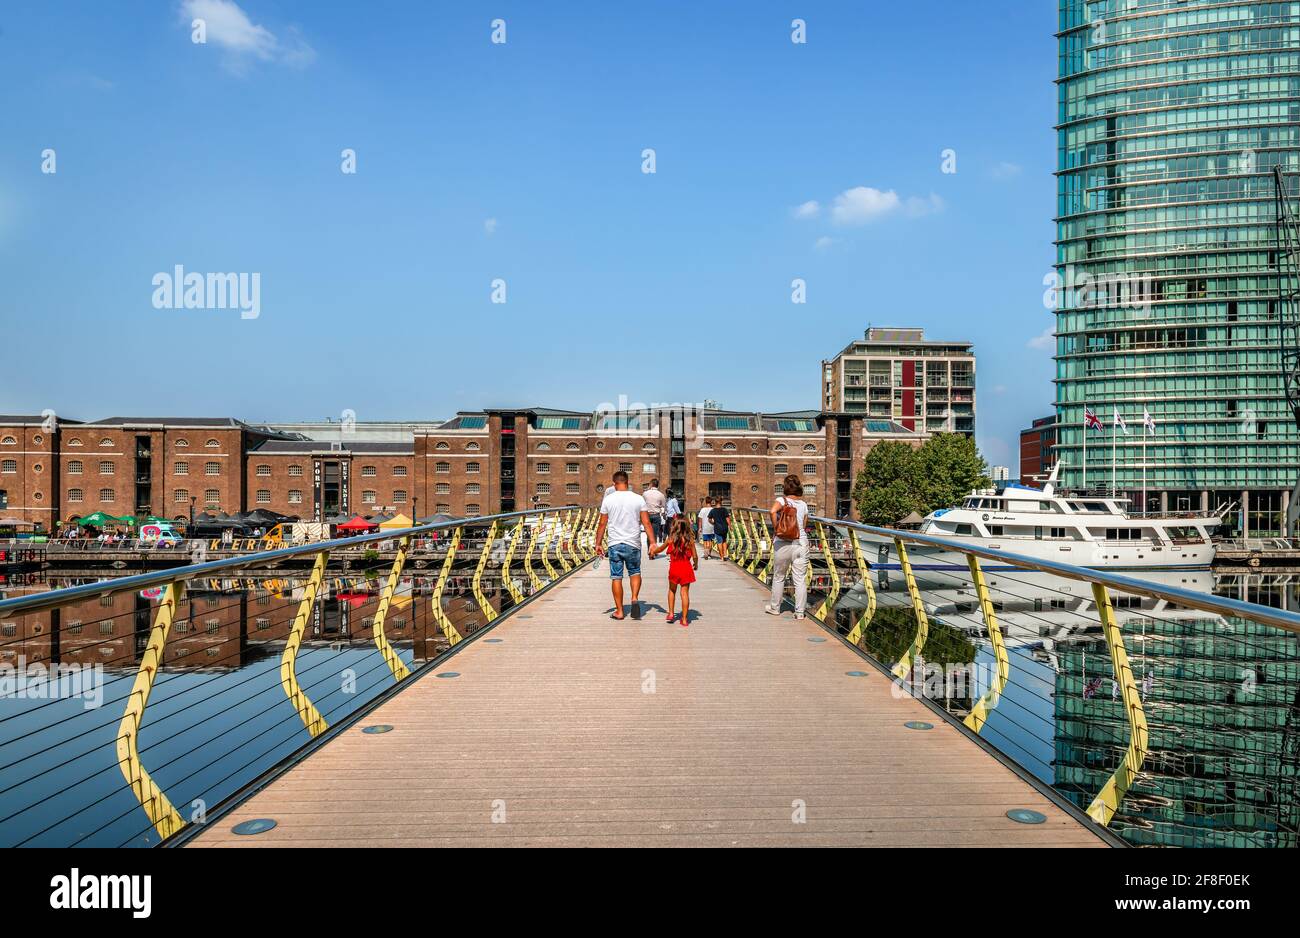 London / UK - August 23 2019: People walk on the North Dock pedestrian bridge that spans the North Dock in Canary Wharf Estate. The old warehouses of Stock Photo